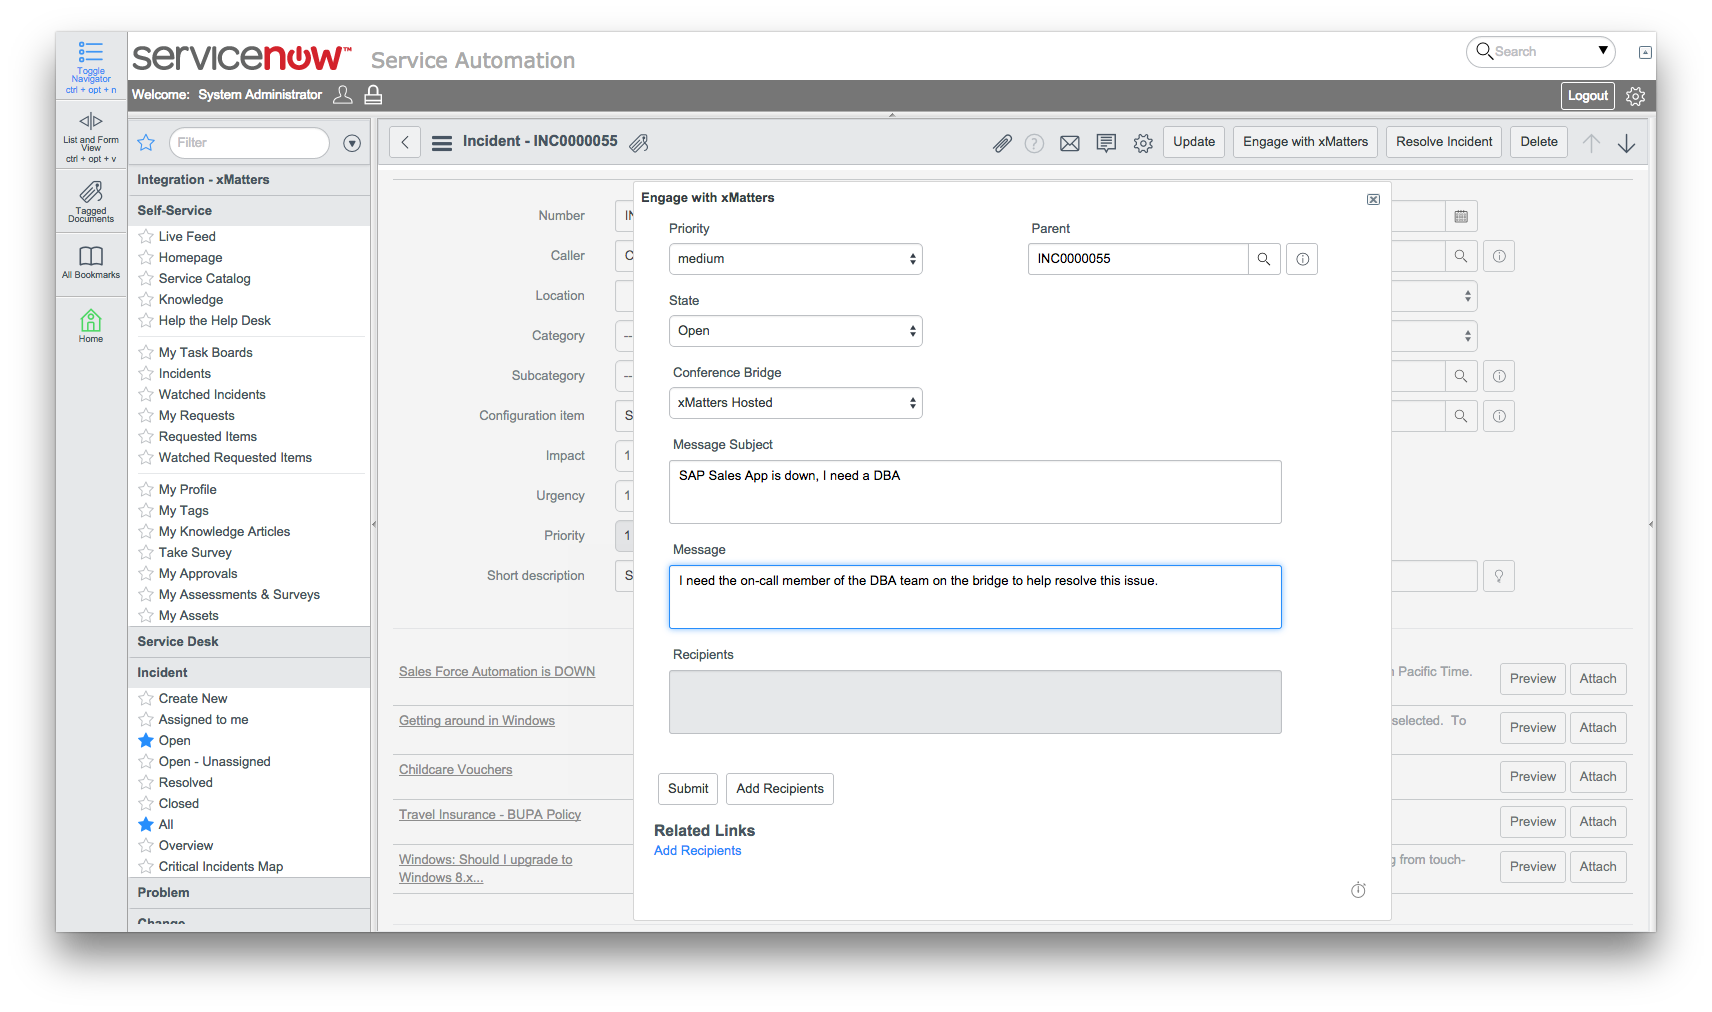 servicenow lansweeper integration